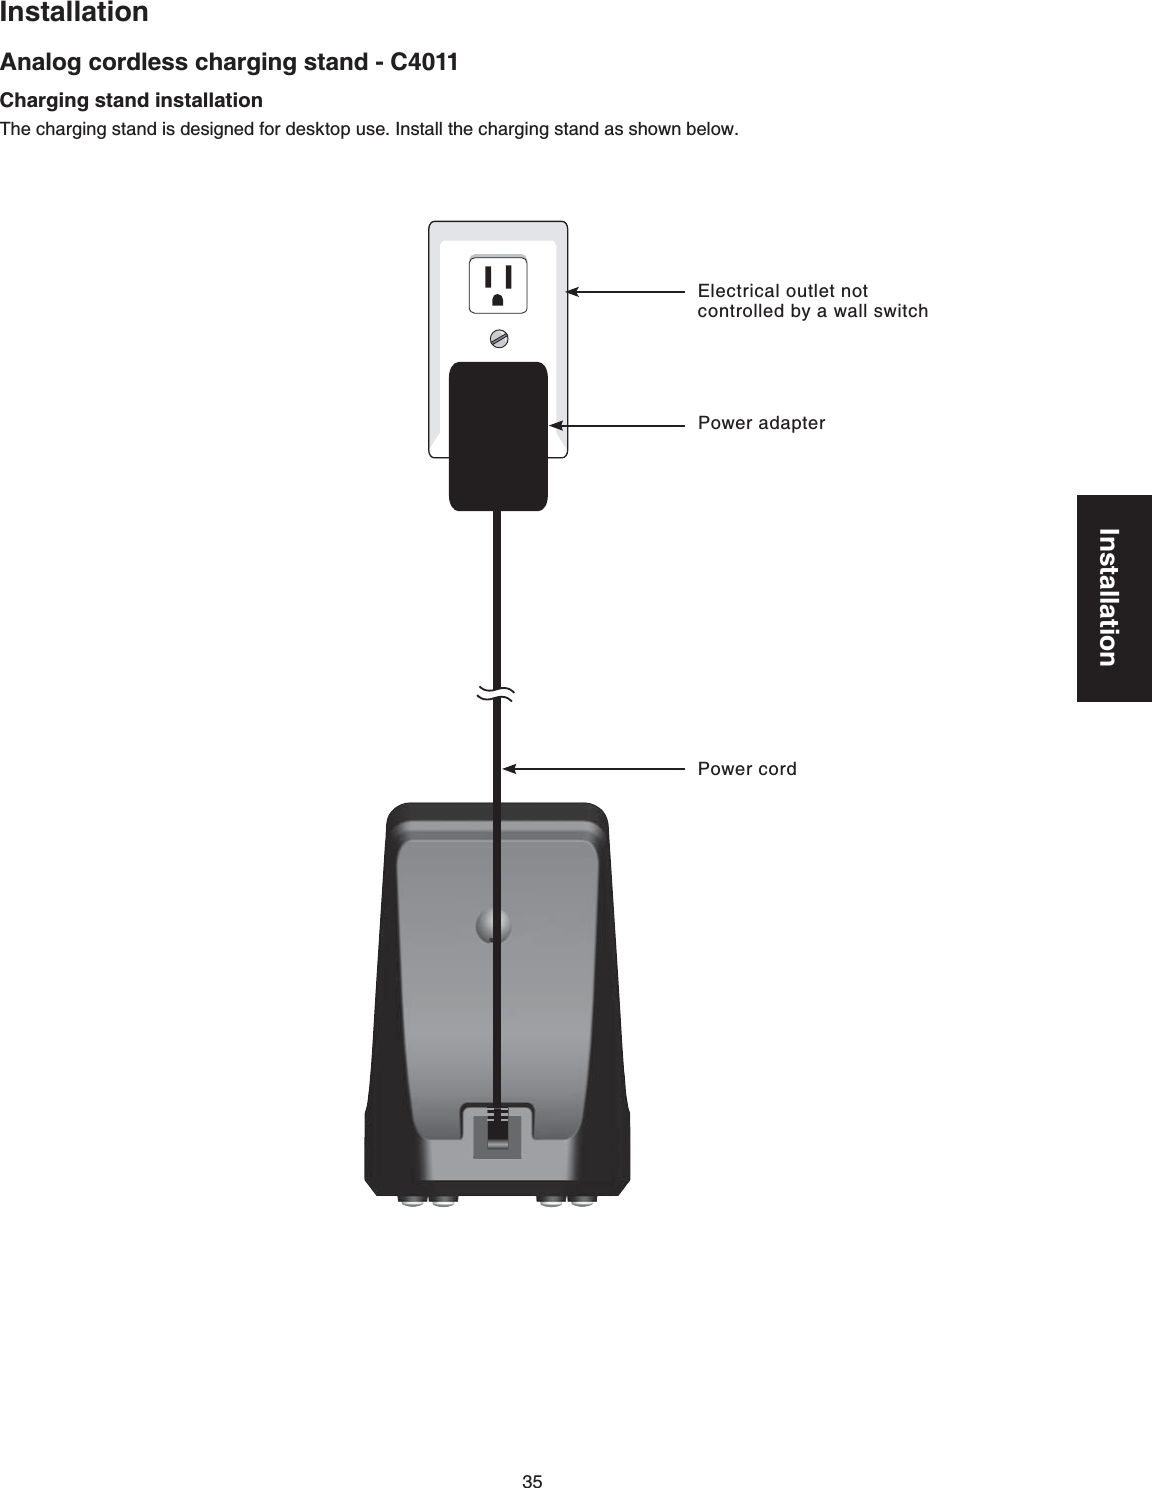 35InstallationAnalog cordless charging stand - C4011InstallationCharging stand installationThe charging stand is designed for desktop use. Install the charging stand as shown below.Power adapterElectrical outlet not controlled by a wall switchPower cord